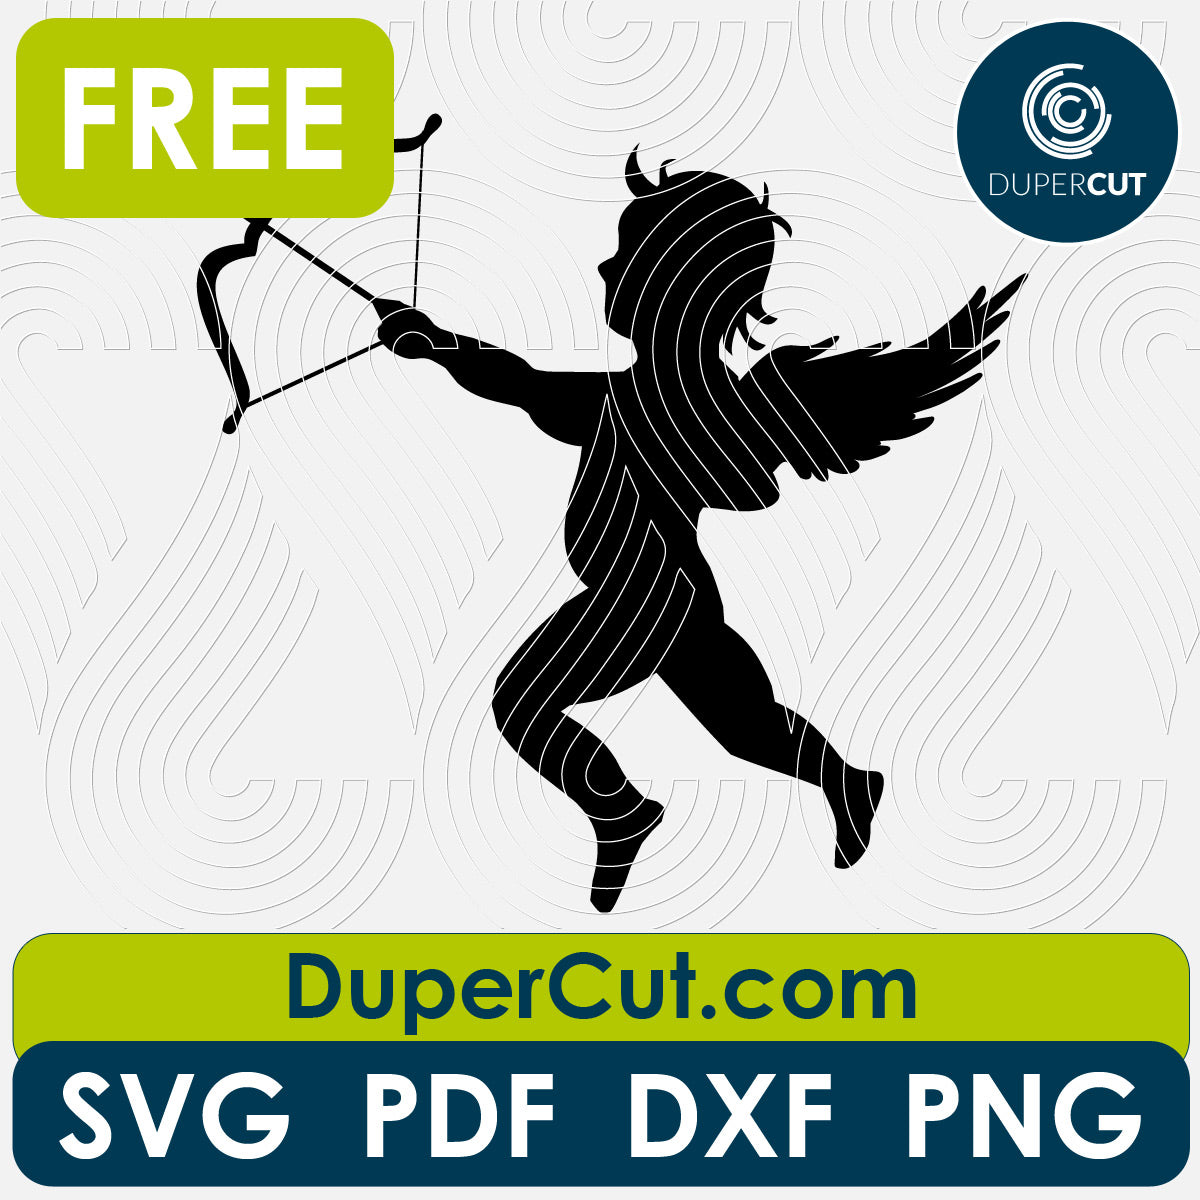 Cupid silhouette, FREE cutting template SVG PNG DXF files for Glowforge, Cricut, Silhouette, CNC laser router by DuperCut.com